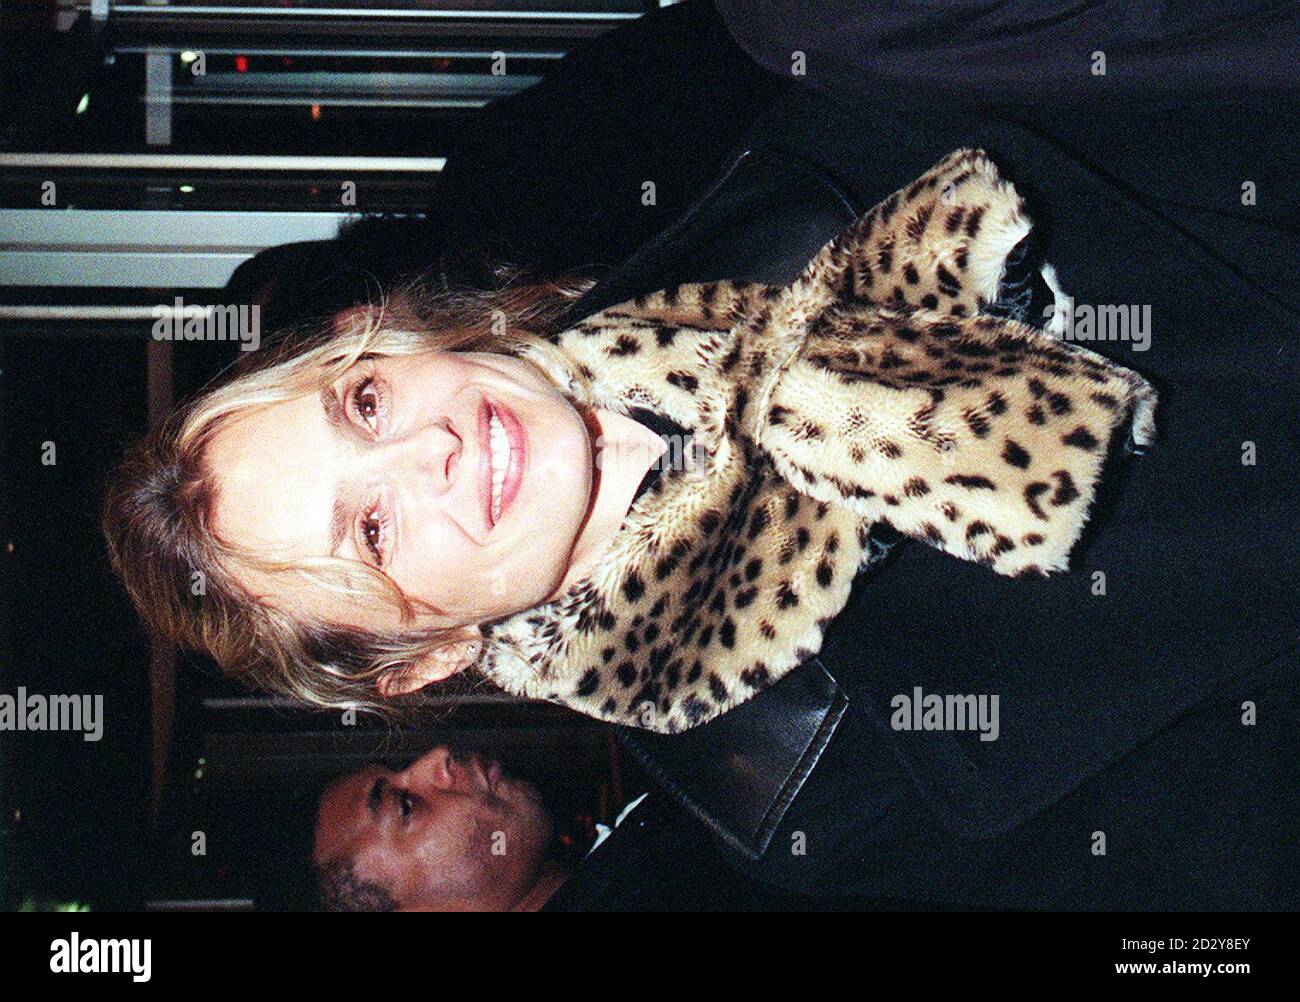 Former James Bond girl Maryam D'Abo arrives at the Gala screening of Cop Land, directed by James Mangold and  starring Sylvester Stallone and Ray Liotta at the London Film Festival in London this evening (Sunday).  Photo by Peter Jordan/PA. Stock Photo